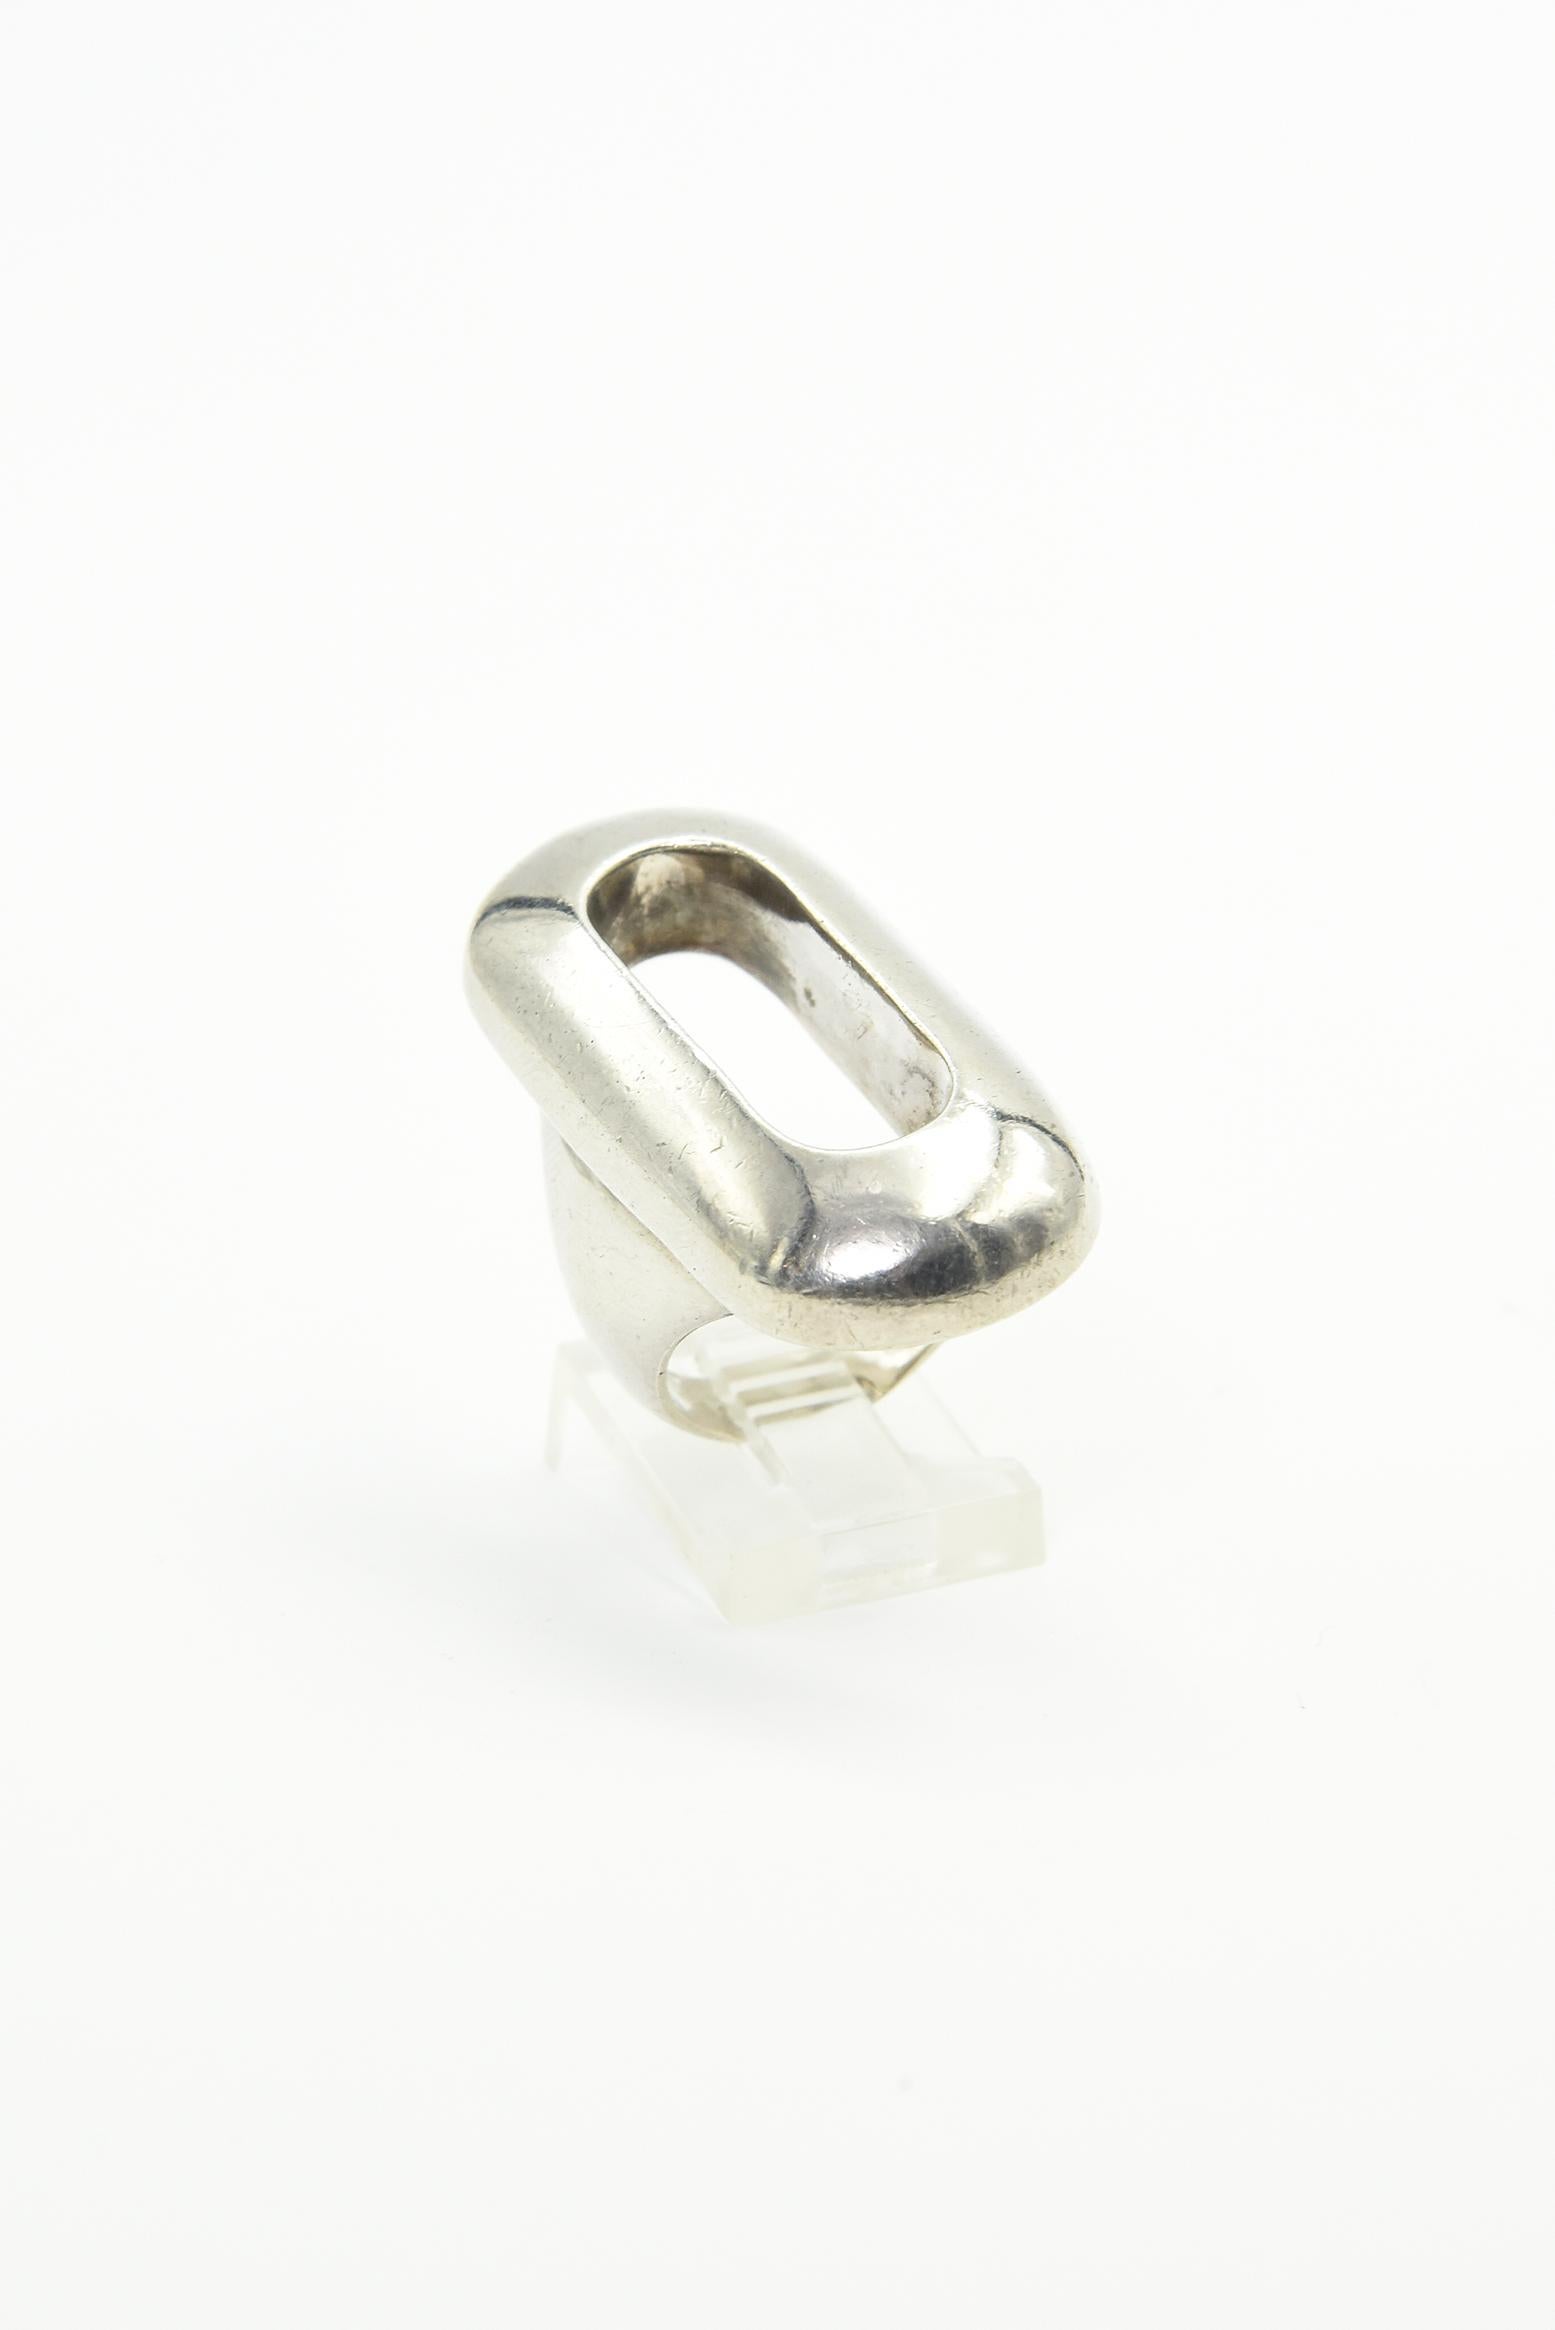 Joachim S'Paliu modernist sterling silver ring featuring an open oval design.

Artist information: Designer Joachim S’Paliu of Spain is a wonderful example of modernist style from the 70's. Born in 1944, the designer was at his creative peak and